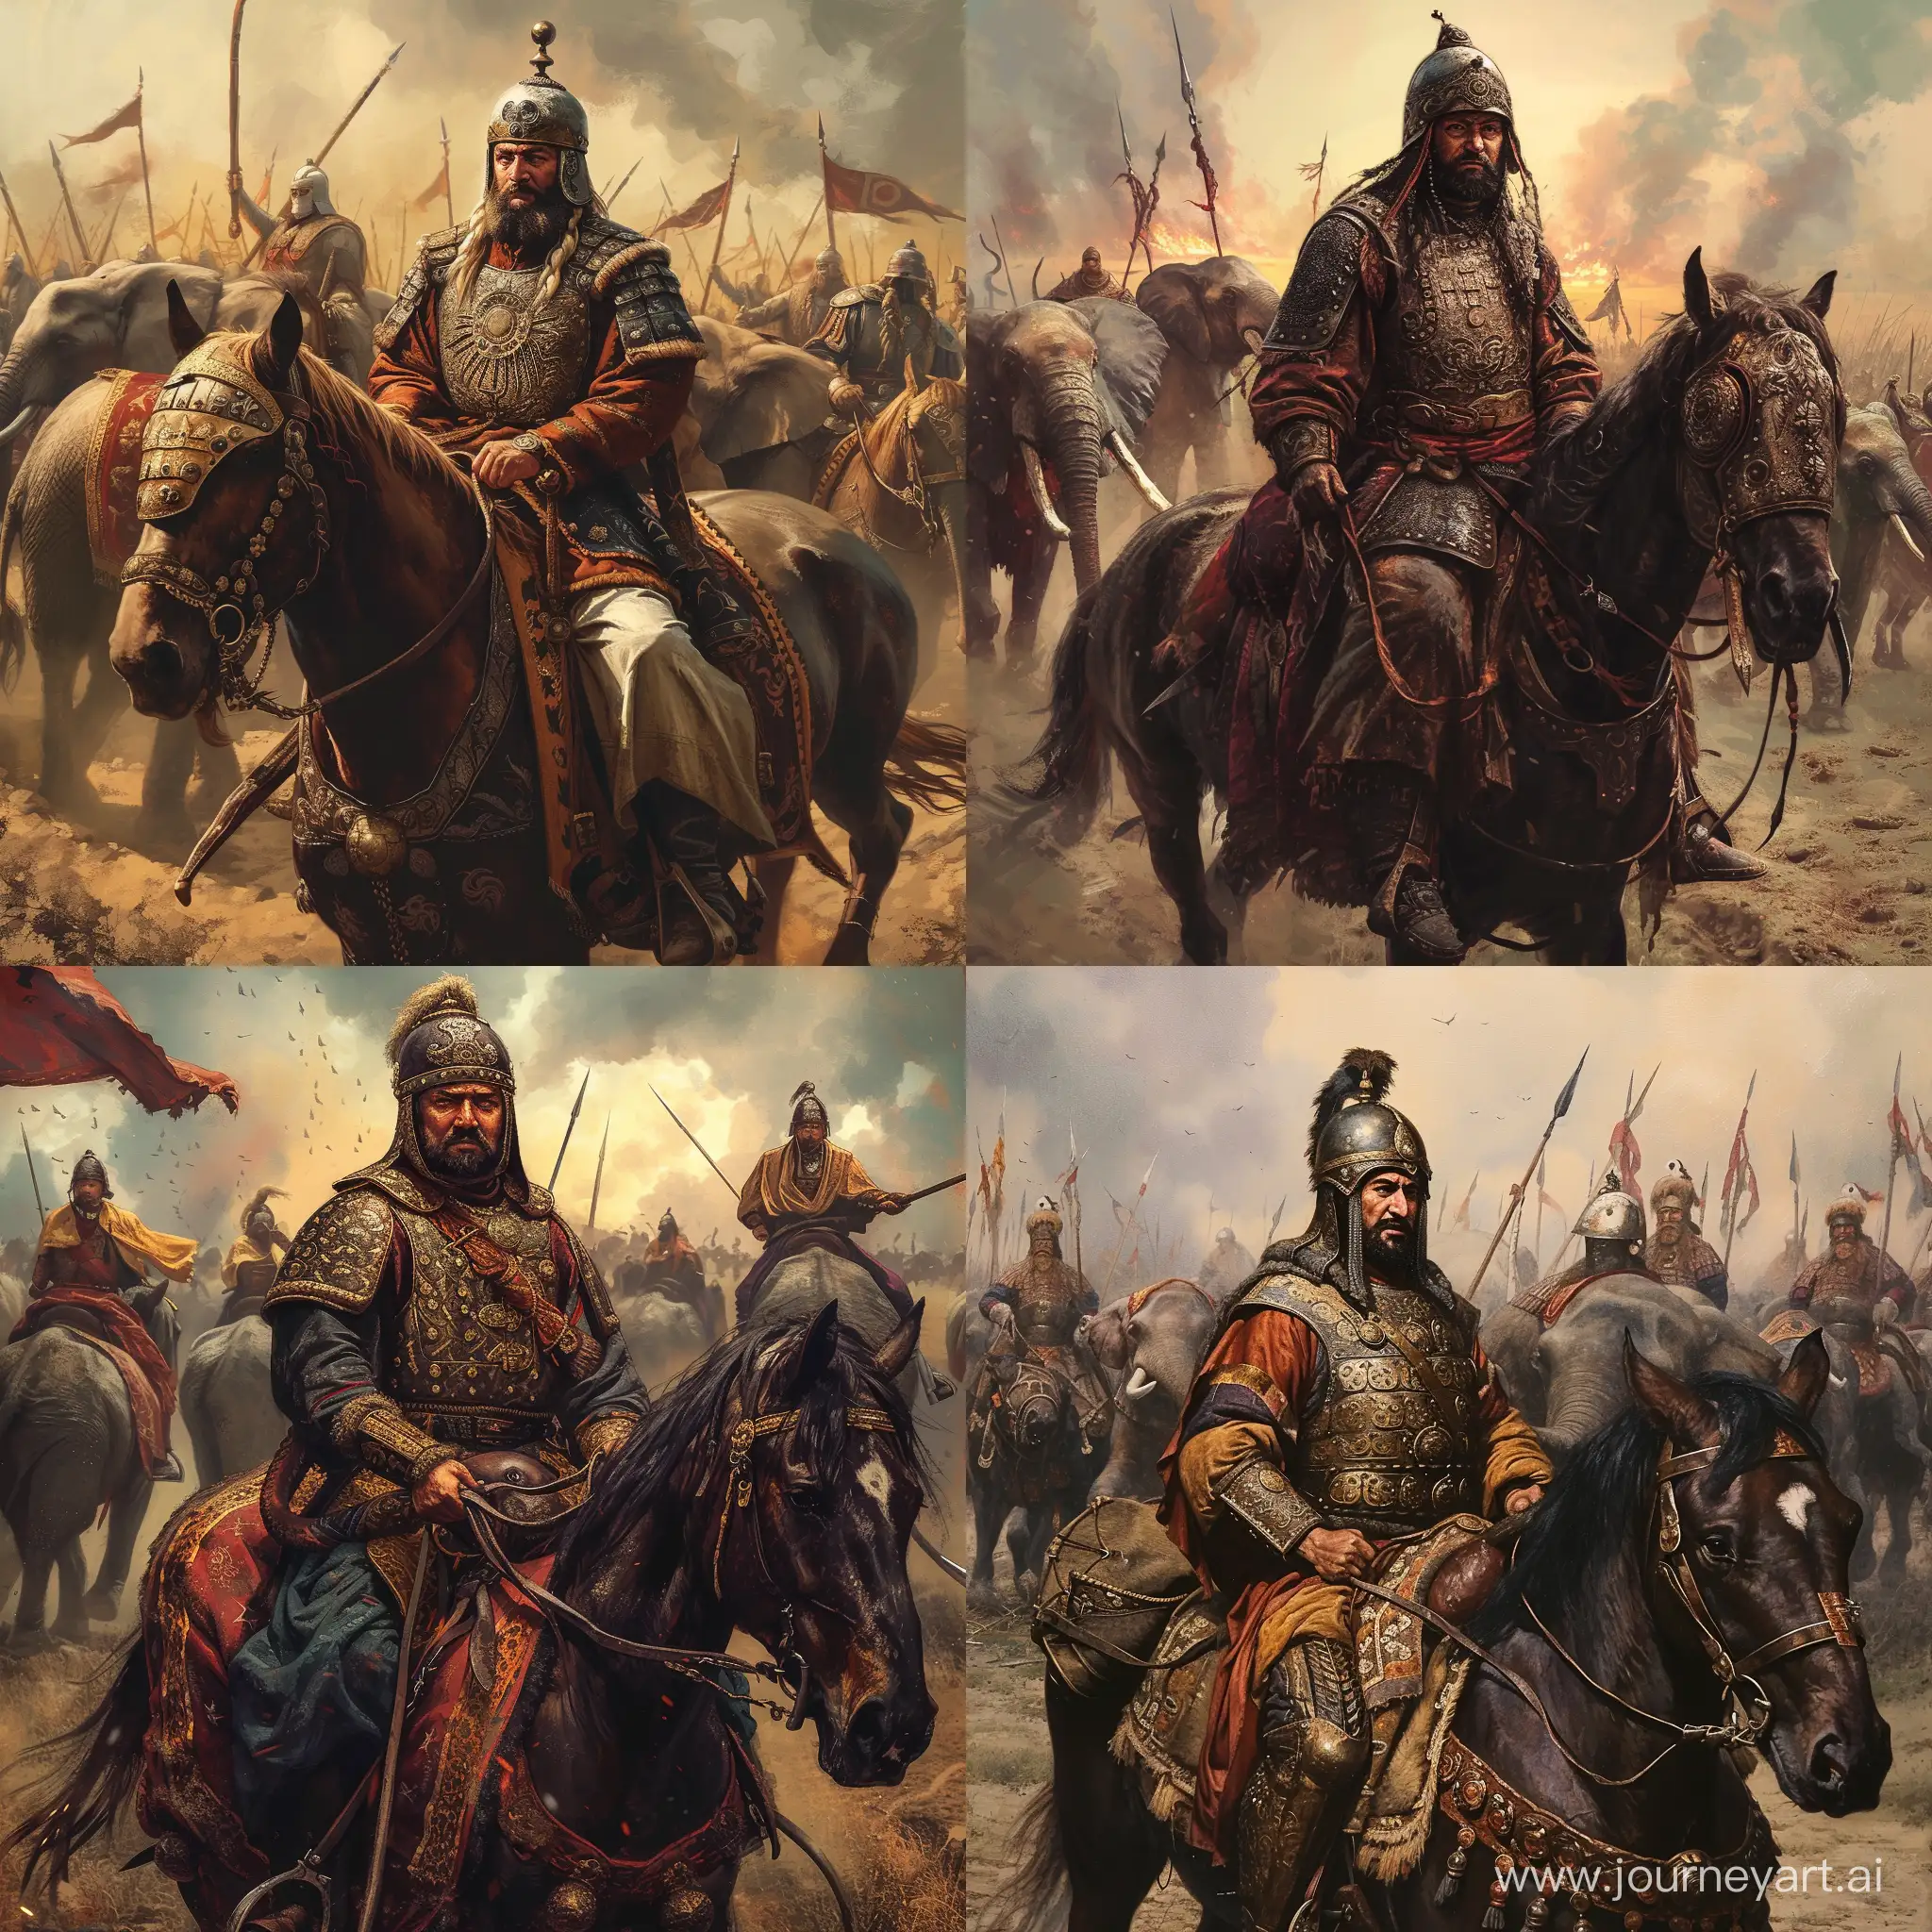 Founder of Timurid Empire Turkic Khan Emir Timur (Tamerlane) on his horse at battle field. He is wearing Turko-Mongol khan armor and helmet. War elephants on background. Impressive detailed. Realistic image.